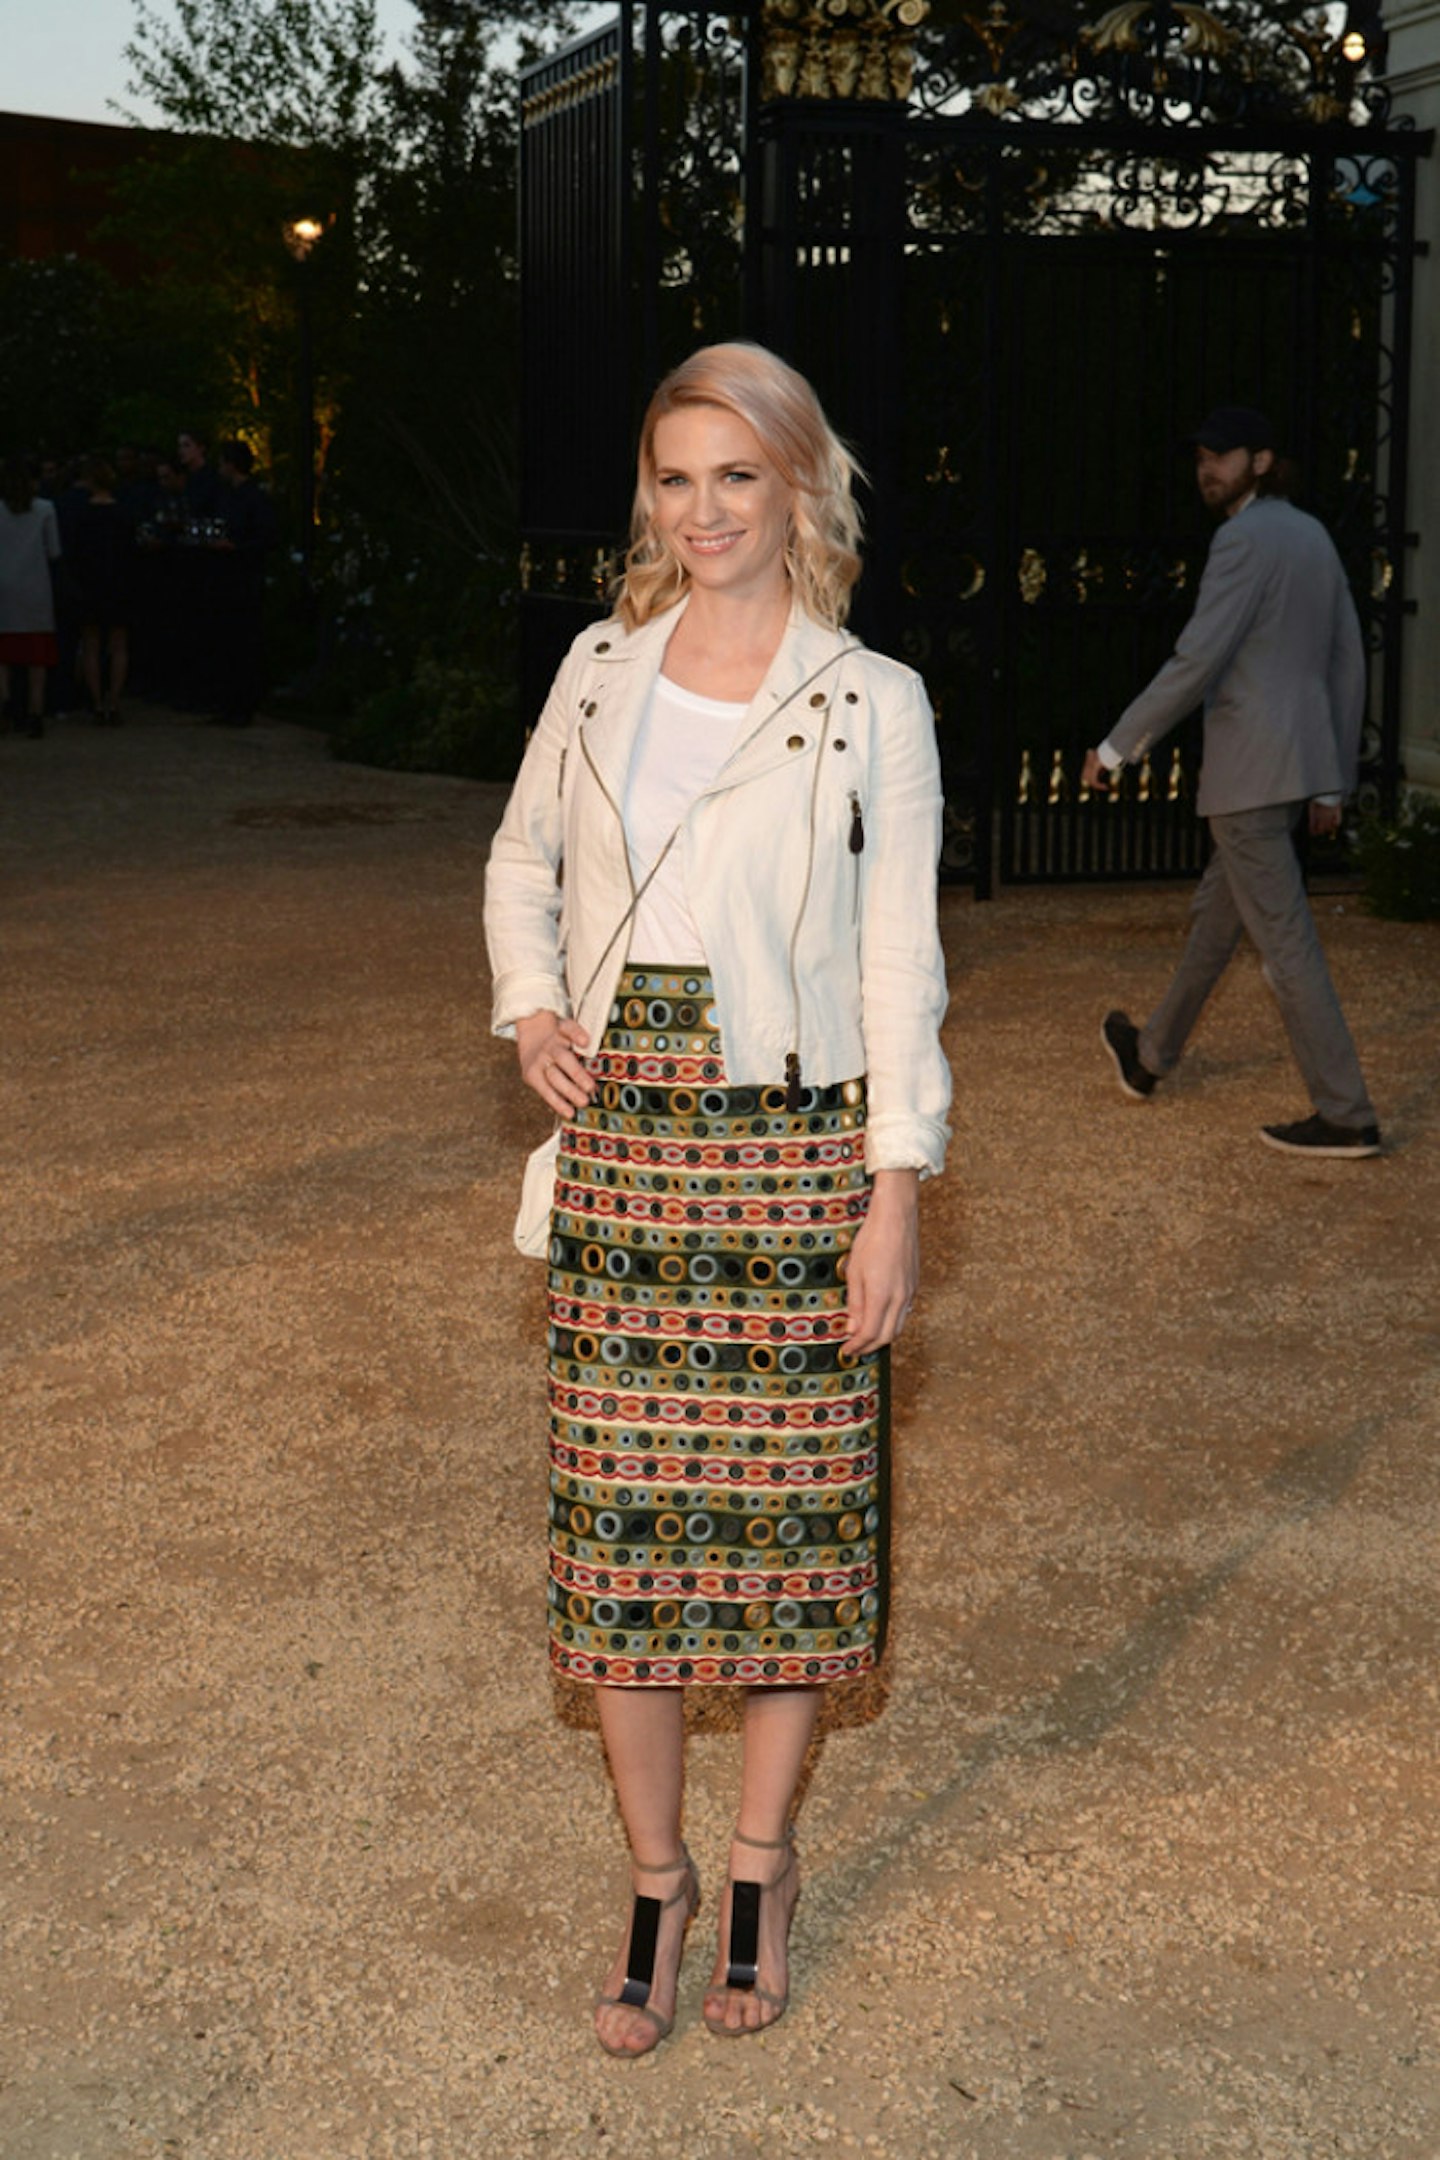 January Jones wearing Burberry at the Burberry _London in Los Angeles_ event